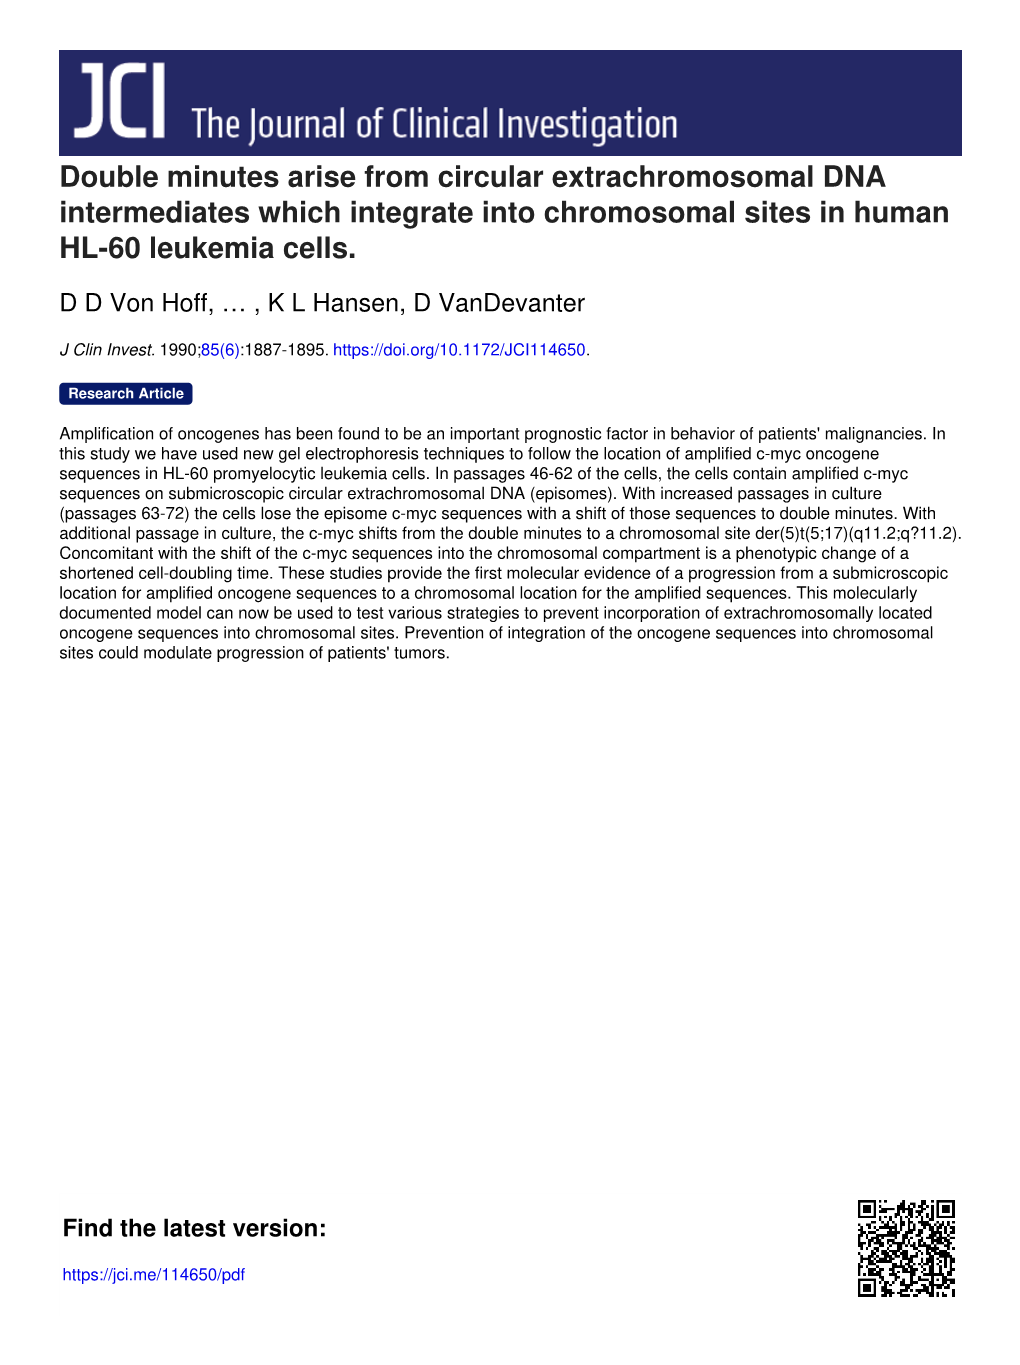 Double Minutes Arise from Circular Extrachromosomal DNA Intermediates Which Integrate Into Chromosomal Sites in Human HL-60 Leukemia Cells